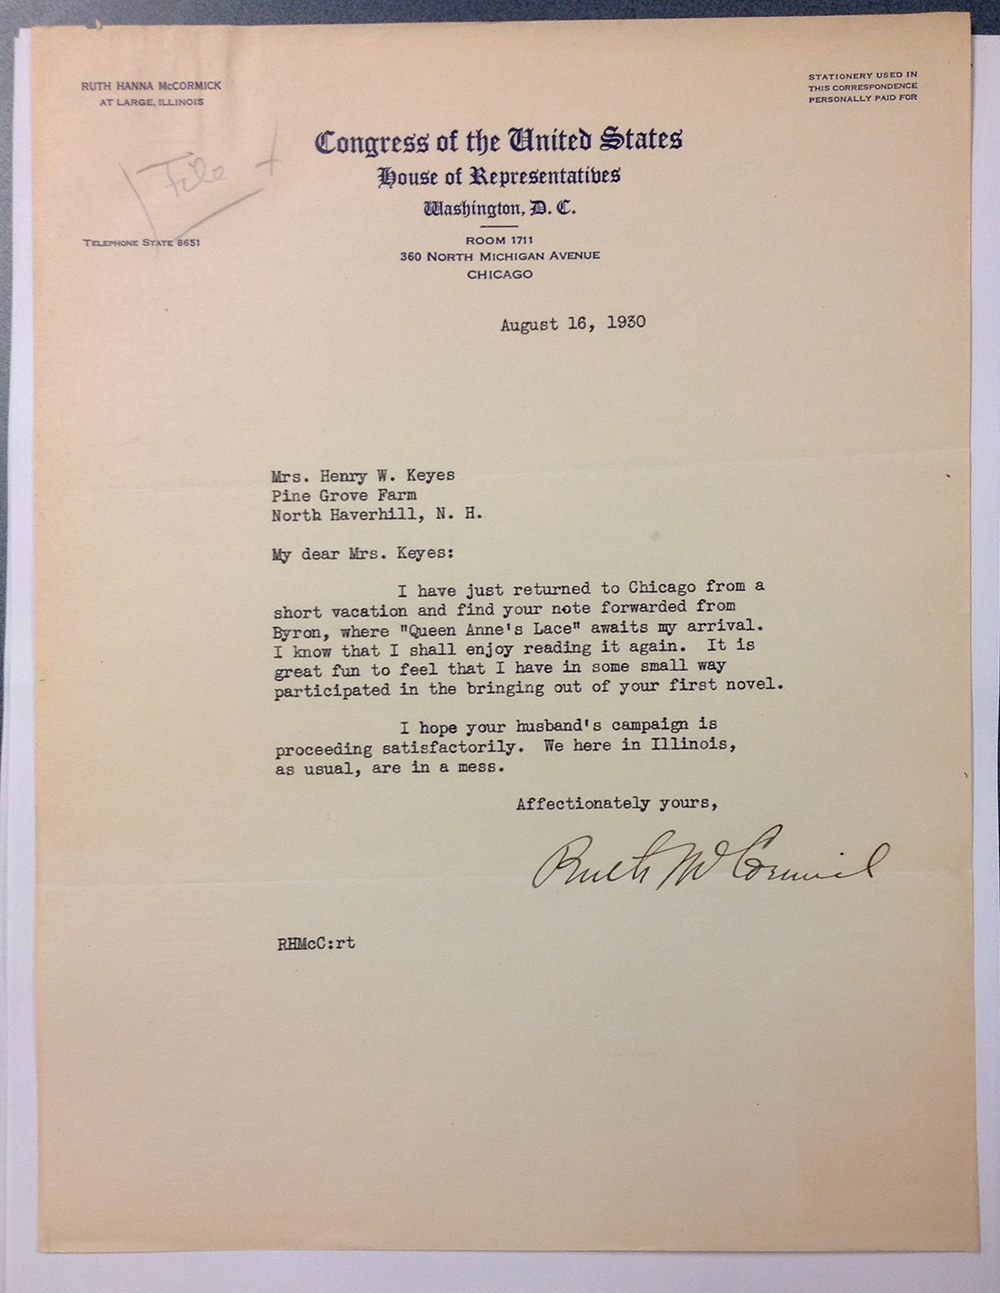 Ruth Hanna McCormick to FPK from August 16, 1930